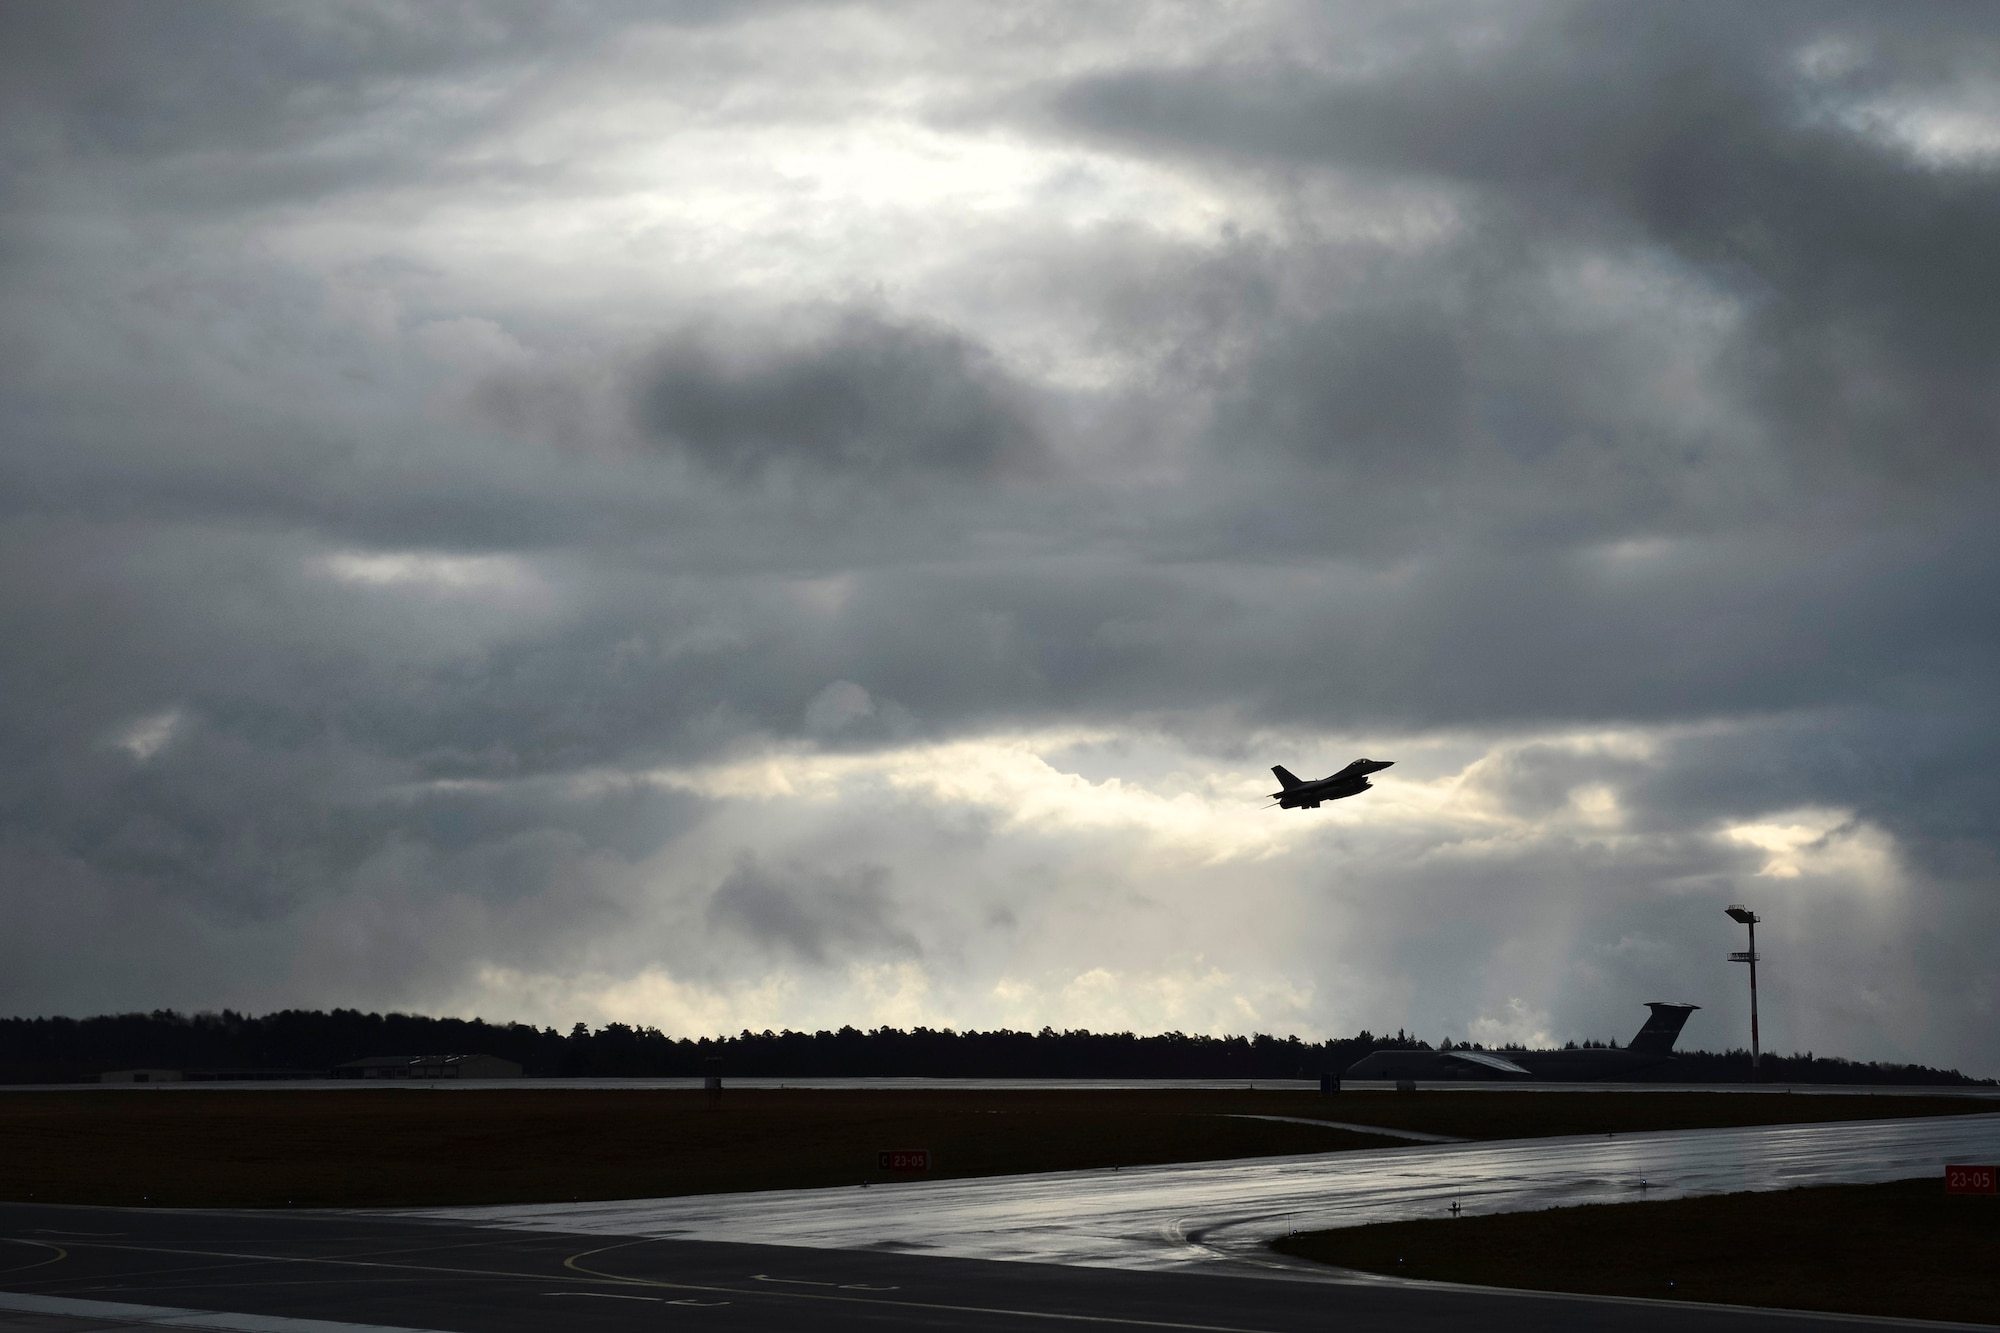 SPANGDAHLEM AIR BASE, Germany – An F-16 Fighting Falcon fighter aircraft from the 480th Fighter Squadron takes off April 12, 2013. The 480th FS is deploying for approximately six months to provide air-to-air combat and air-to-surface attack capabilities. (U.S. Air Force photo by Staff Sgt. Nathanael Callon/Released)